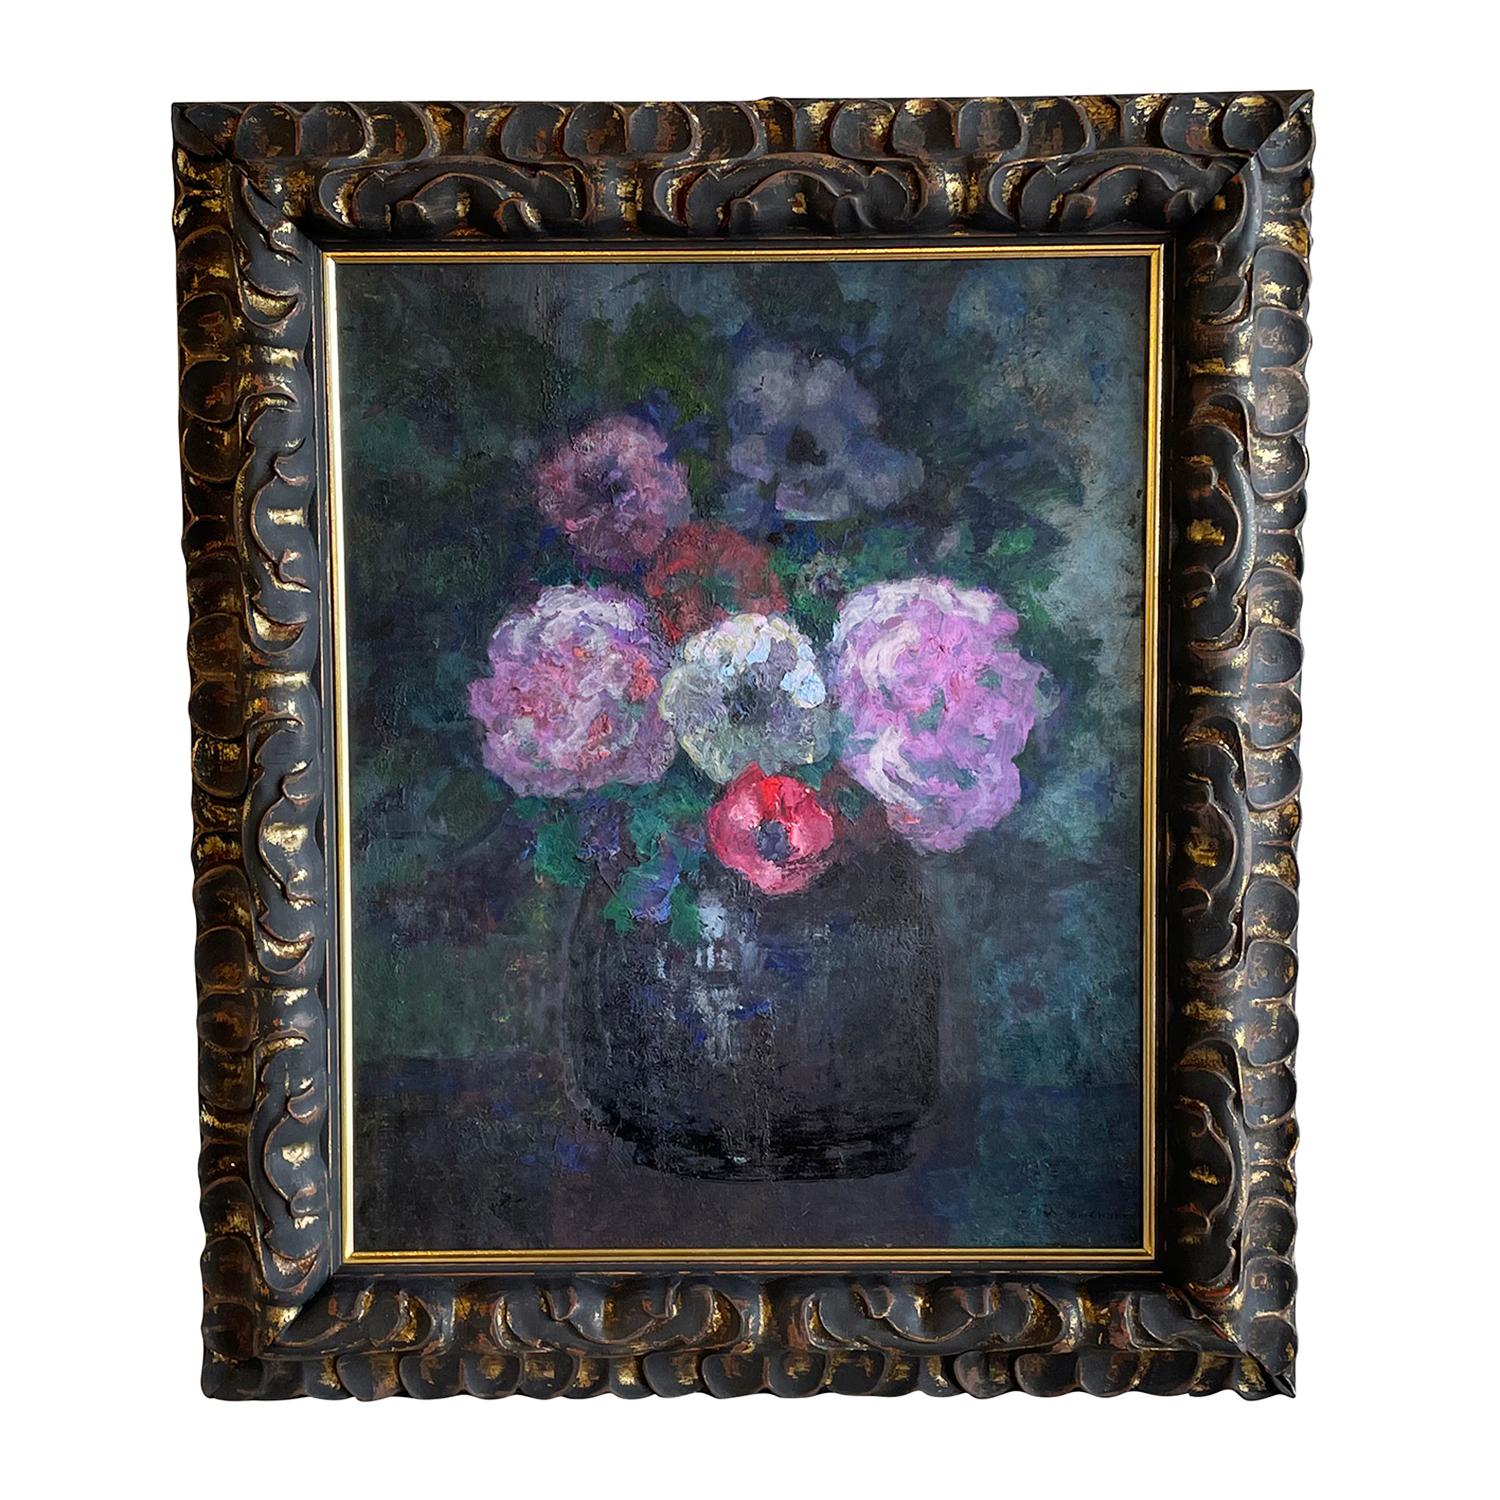 A dark-green, blue oil on canvas painting of a half-round vase with colorful anemones, flowers painted by Victor Charreton, in good condition. The antique French painting represents the 19th century Impressionism art movement period. Signed on the